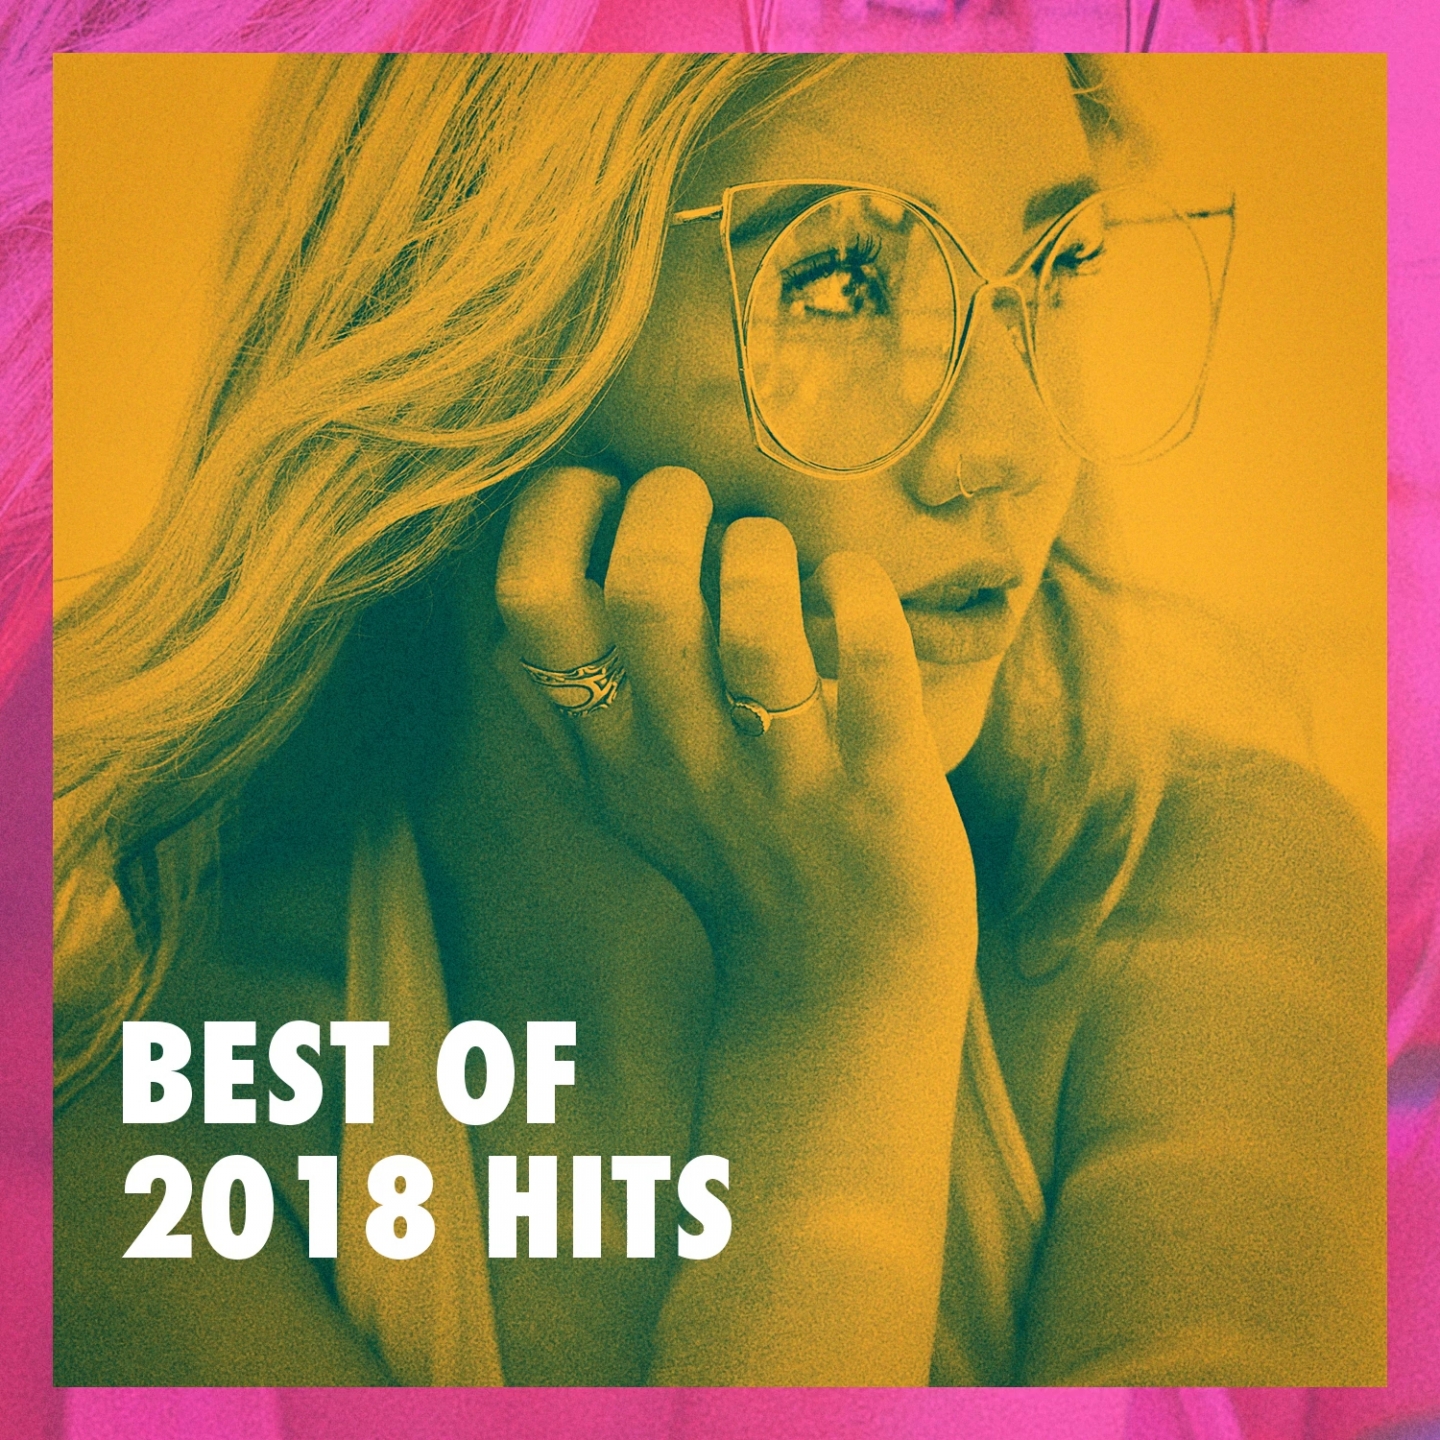 Best of 2018 Hits